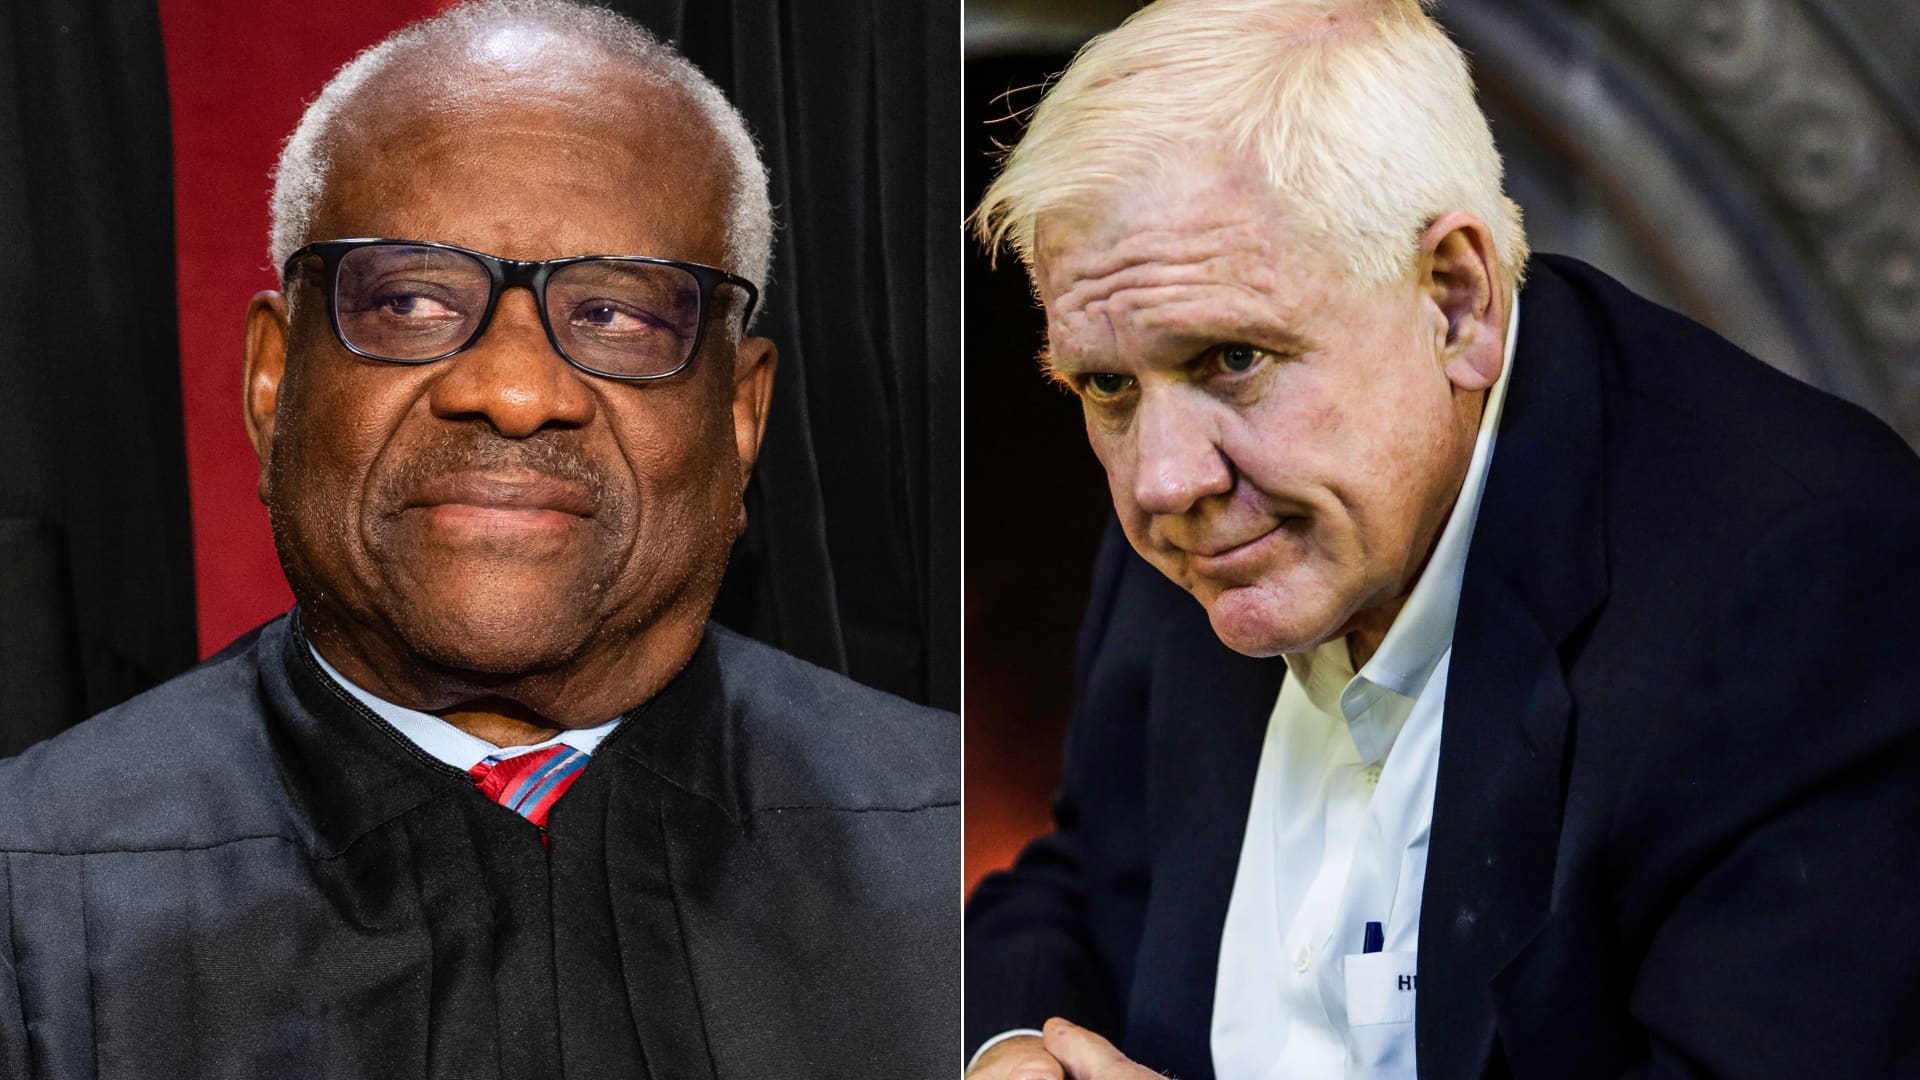 Supreme Court: Harlan Crow paid school tuition for Clarence Thomas' nephew, report says